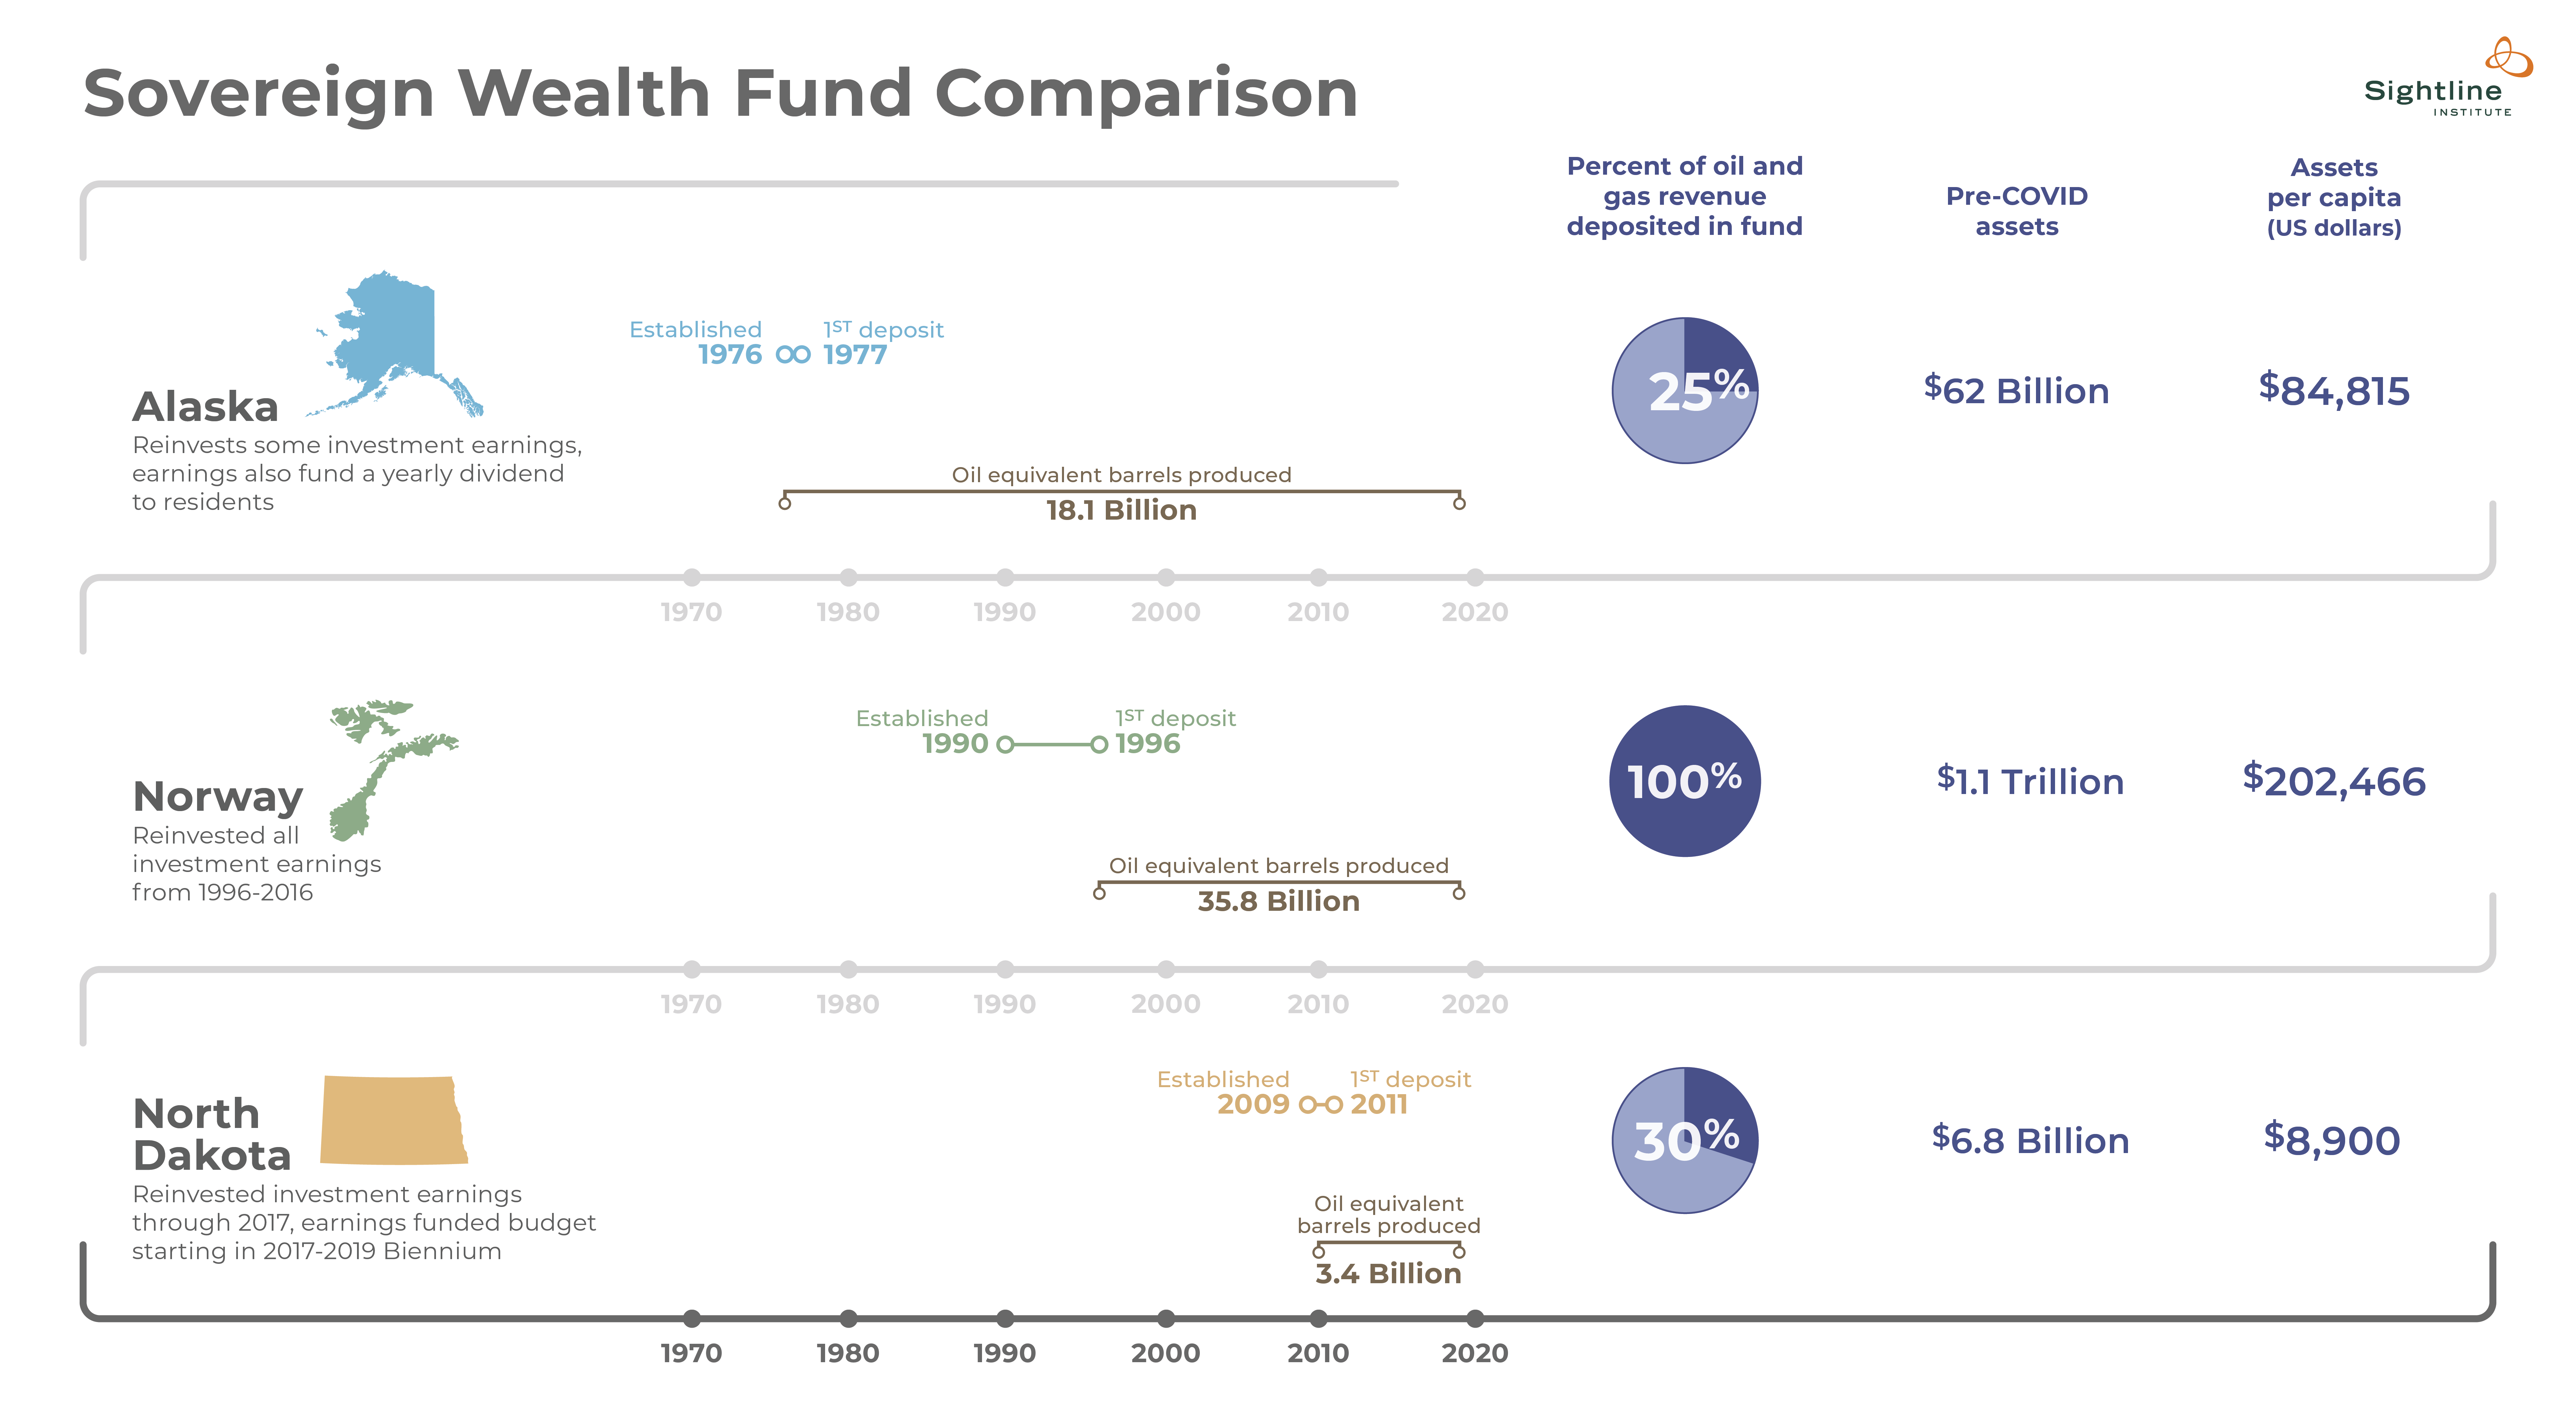 comparison of sovereign wealth funds: North Dakota, Norway, and Alaska